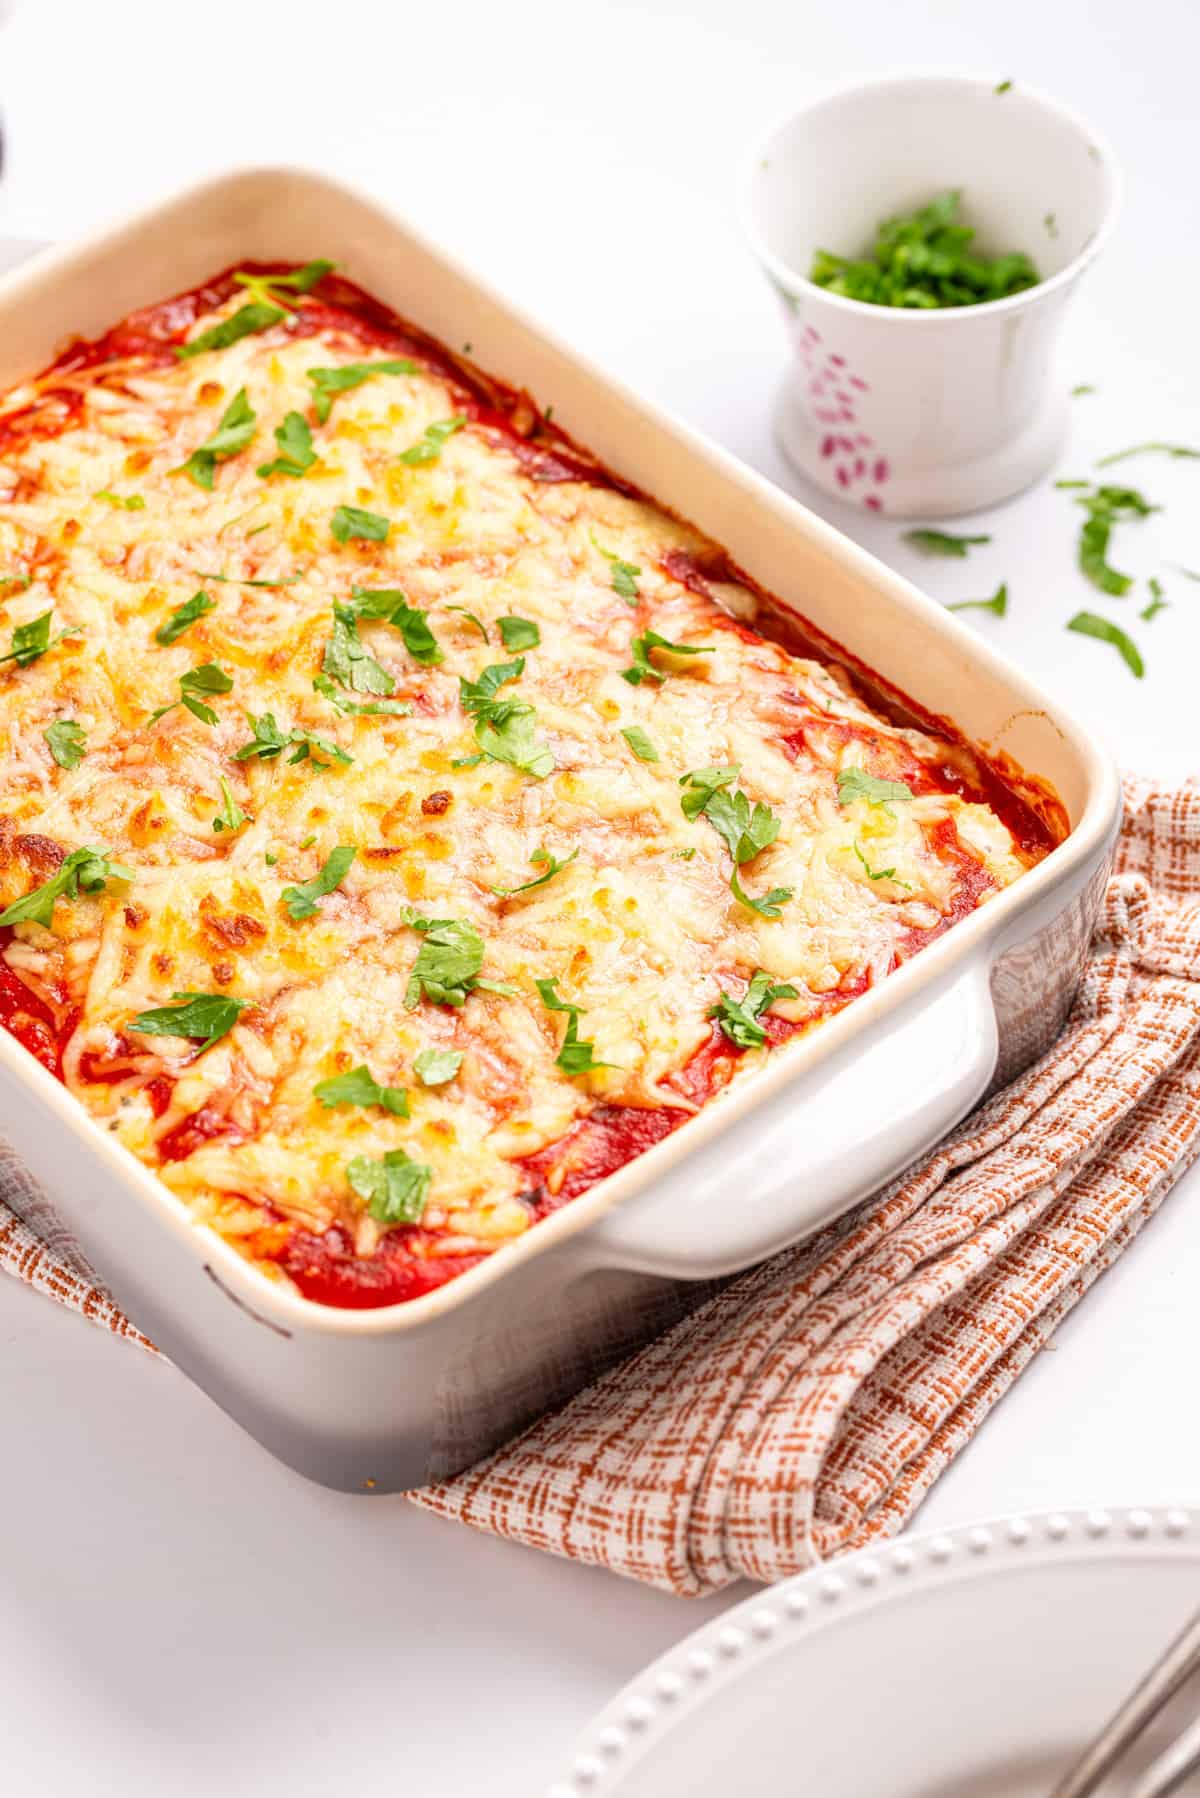 An image of spaghetti squash lasagna in a white baking dish with parsley on the side.